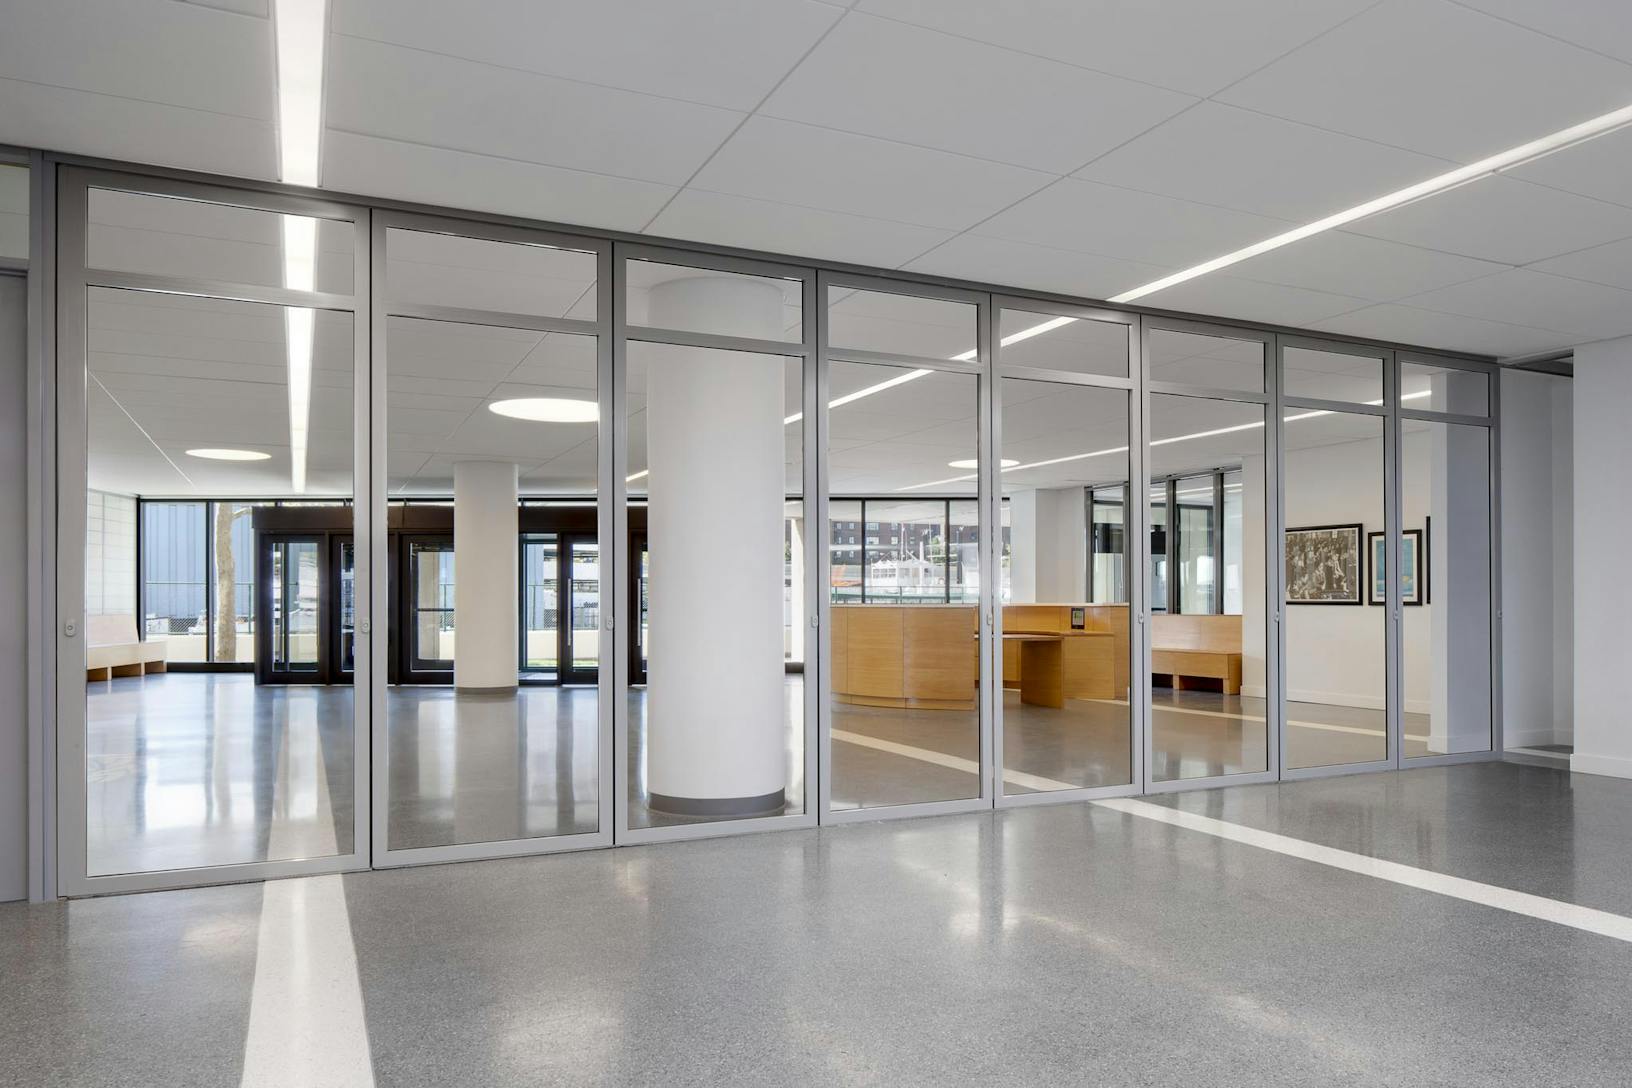 Commercial segmented curved sliding glass walls at The Union Nations International School in NY